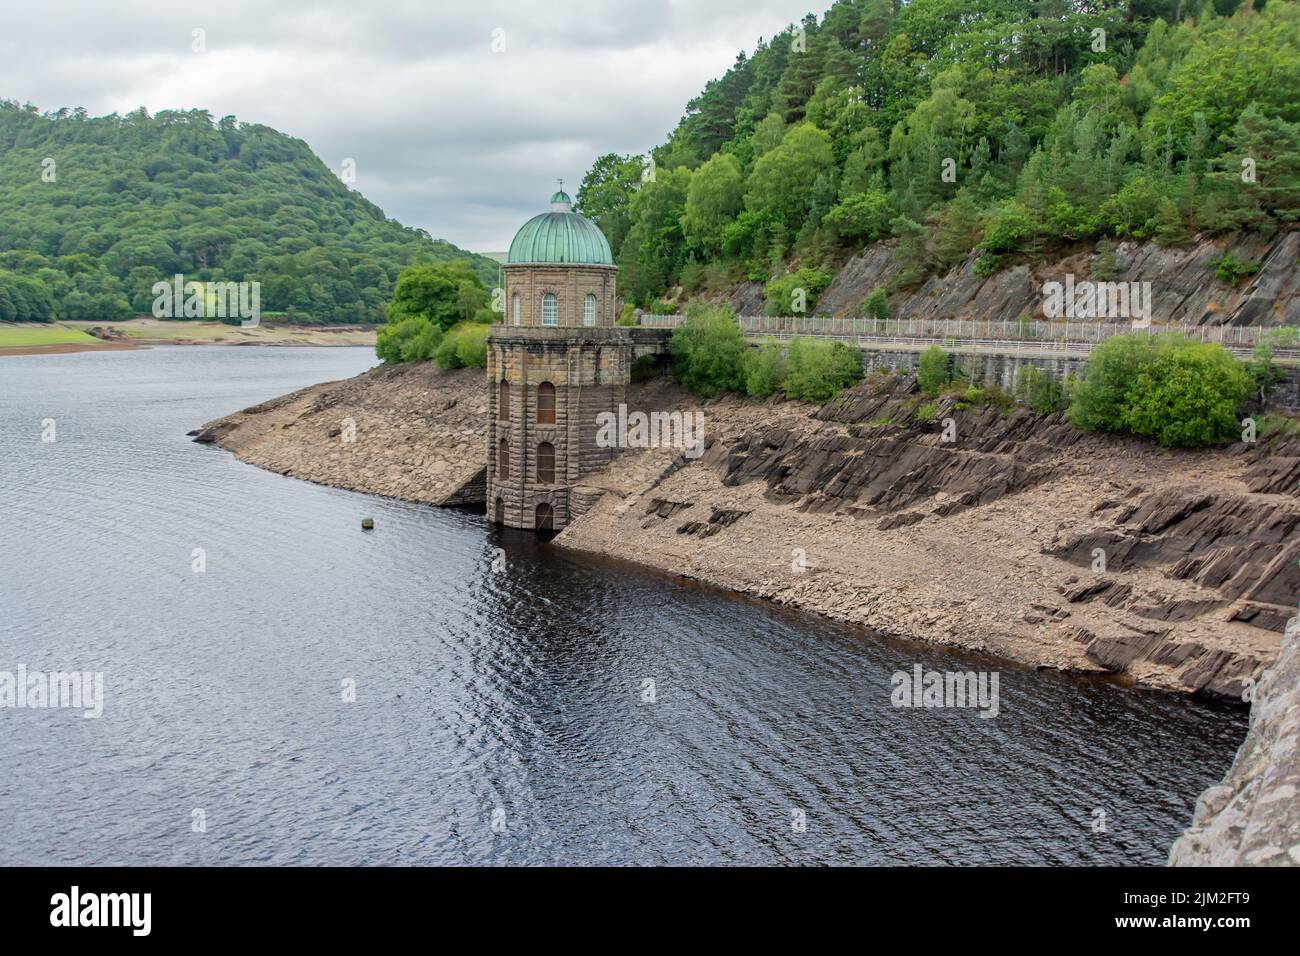 These are the water levels after a dry summer so far in the uk. this is the Elan Valley in Mid-Wales. Stock Photo